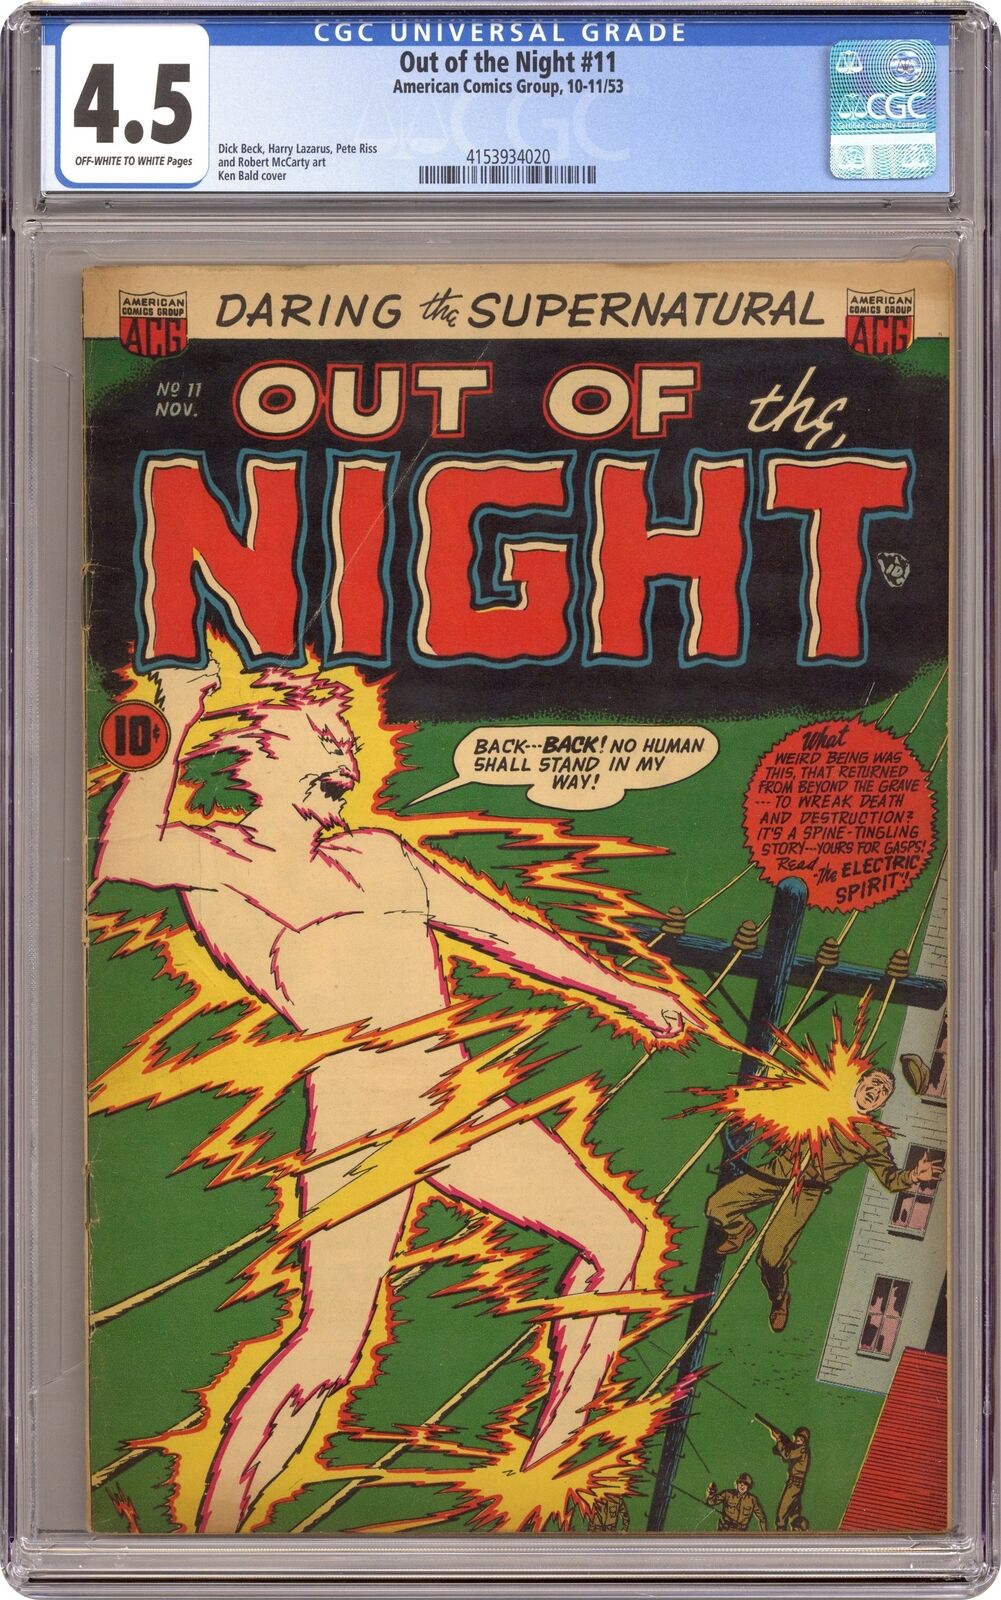 Out of the Night #11 CGC 4.5 1953 4153934020